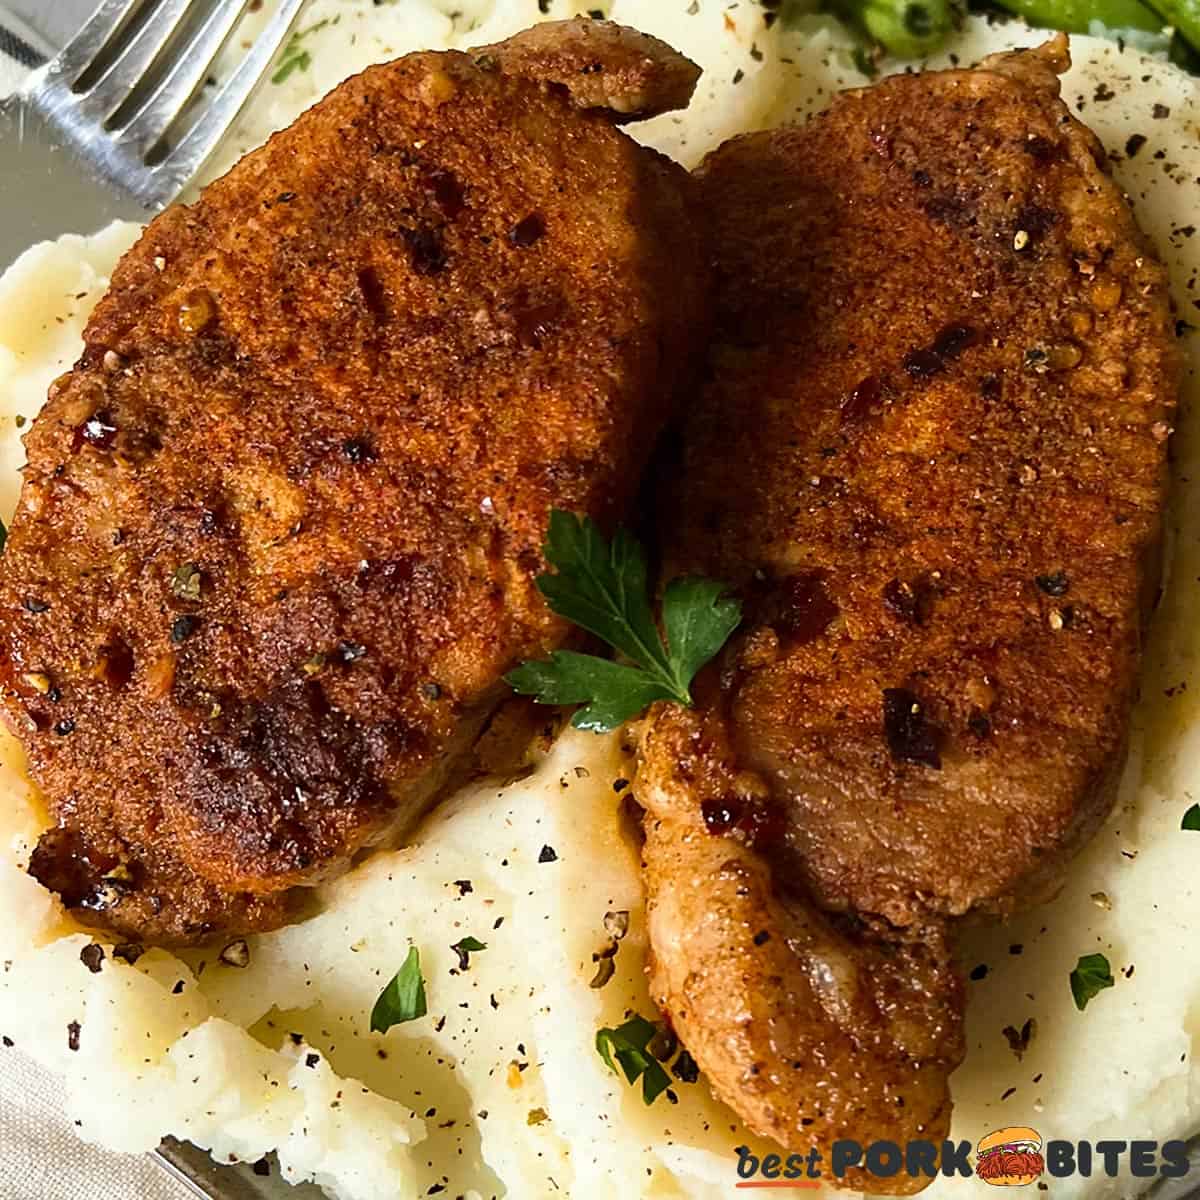 a closeup of two pressure cooked pork chops on mashed potatoes